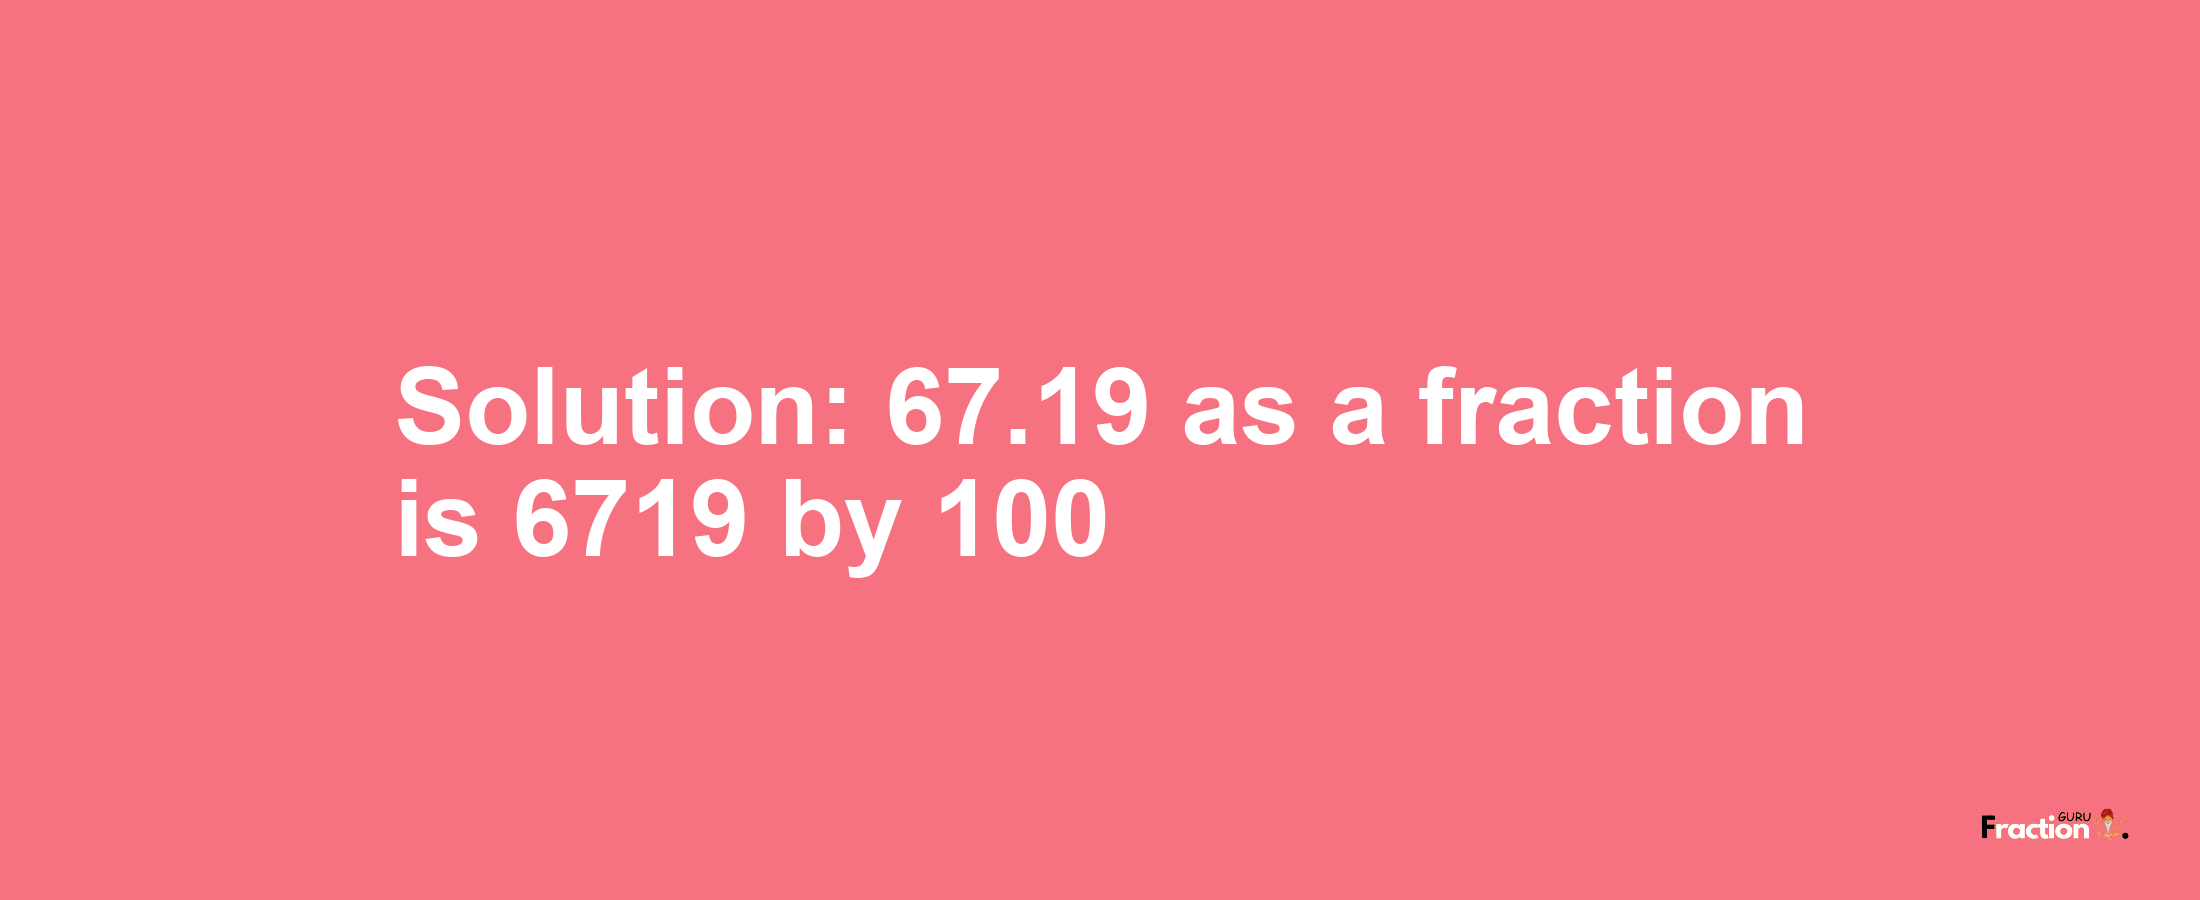 Solution:67.19 as a fraction is 6719/100